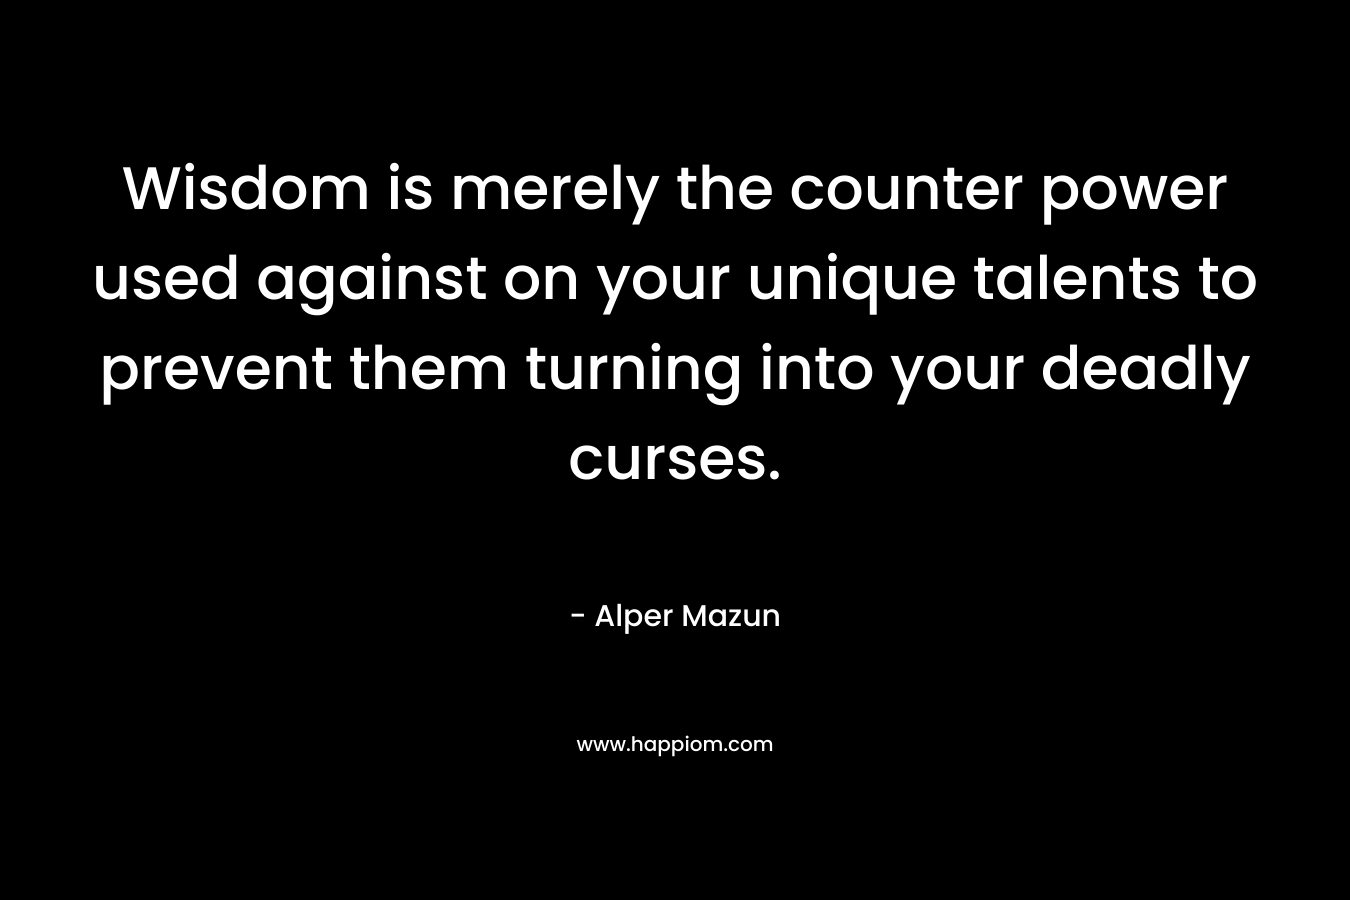 Wisdom is merely the counter power used against on your unique talents to prevent them turning into your deadly curses.